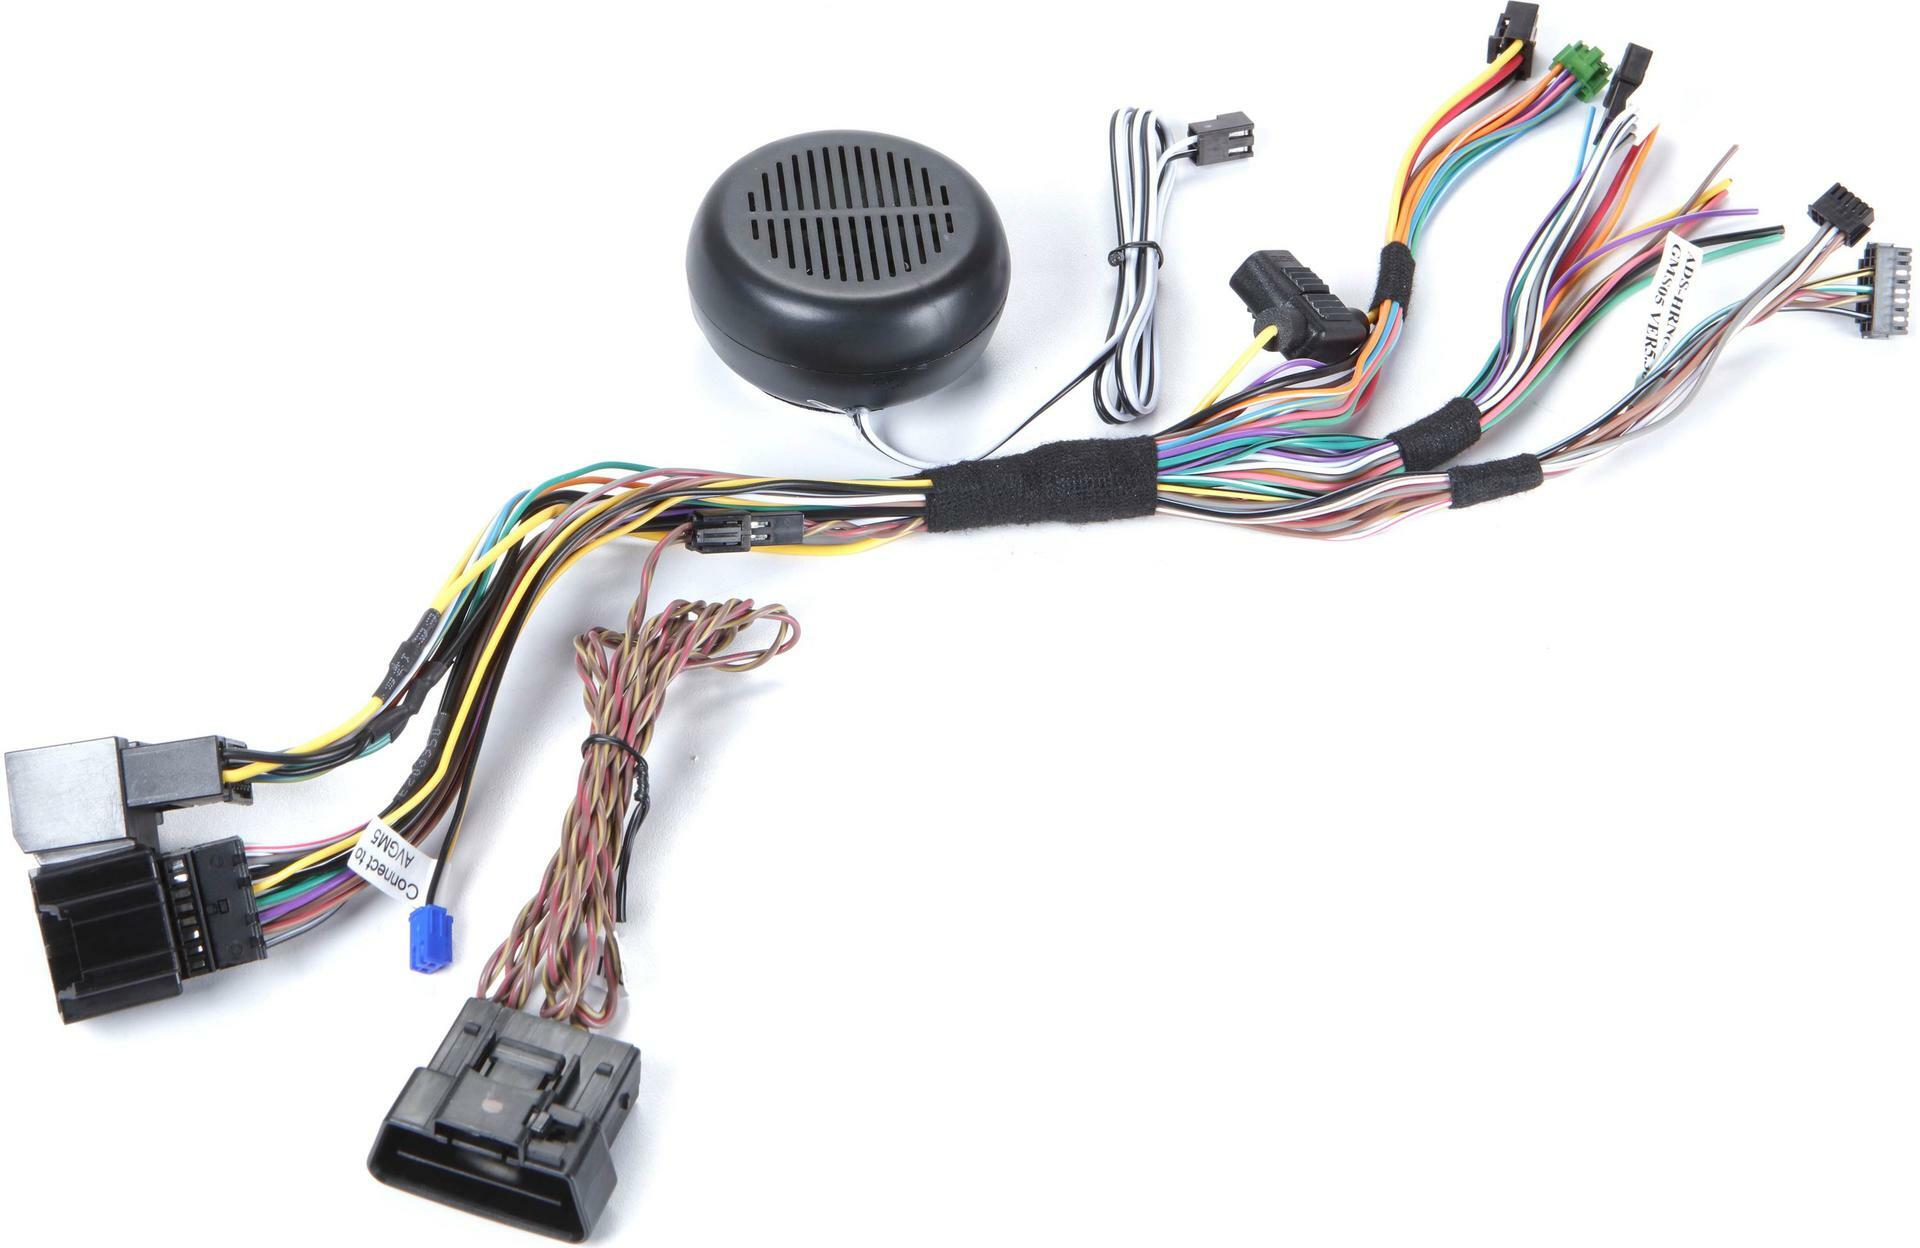 Idatalink HRN-HRR-GM5 + ADS-MRR Plug & Play T-Harness for select 2006-up GM vehicles